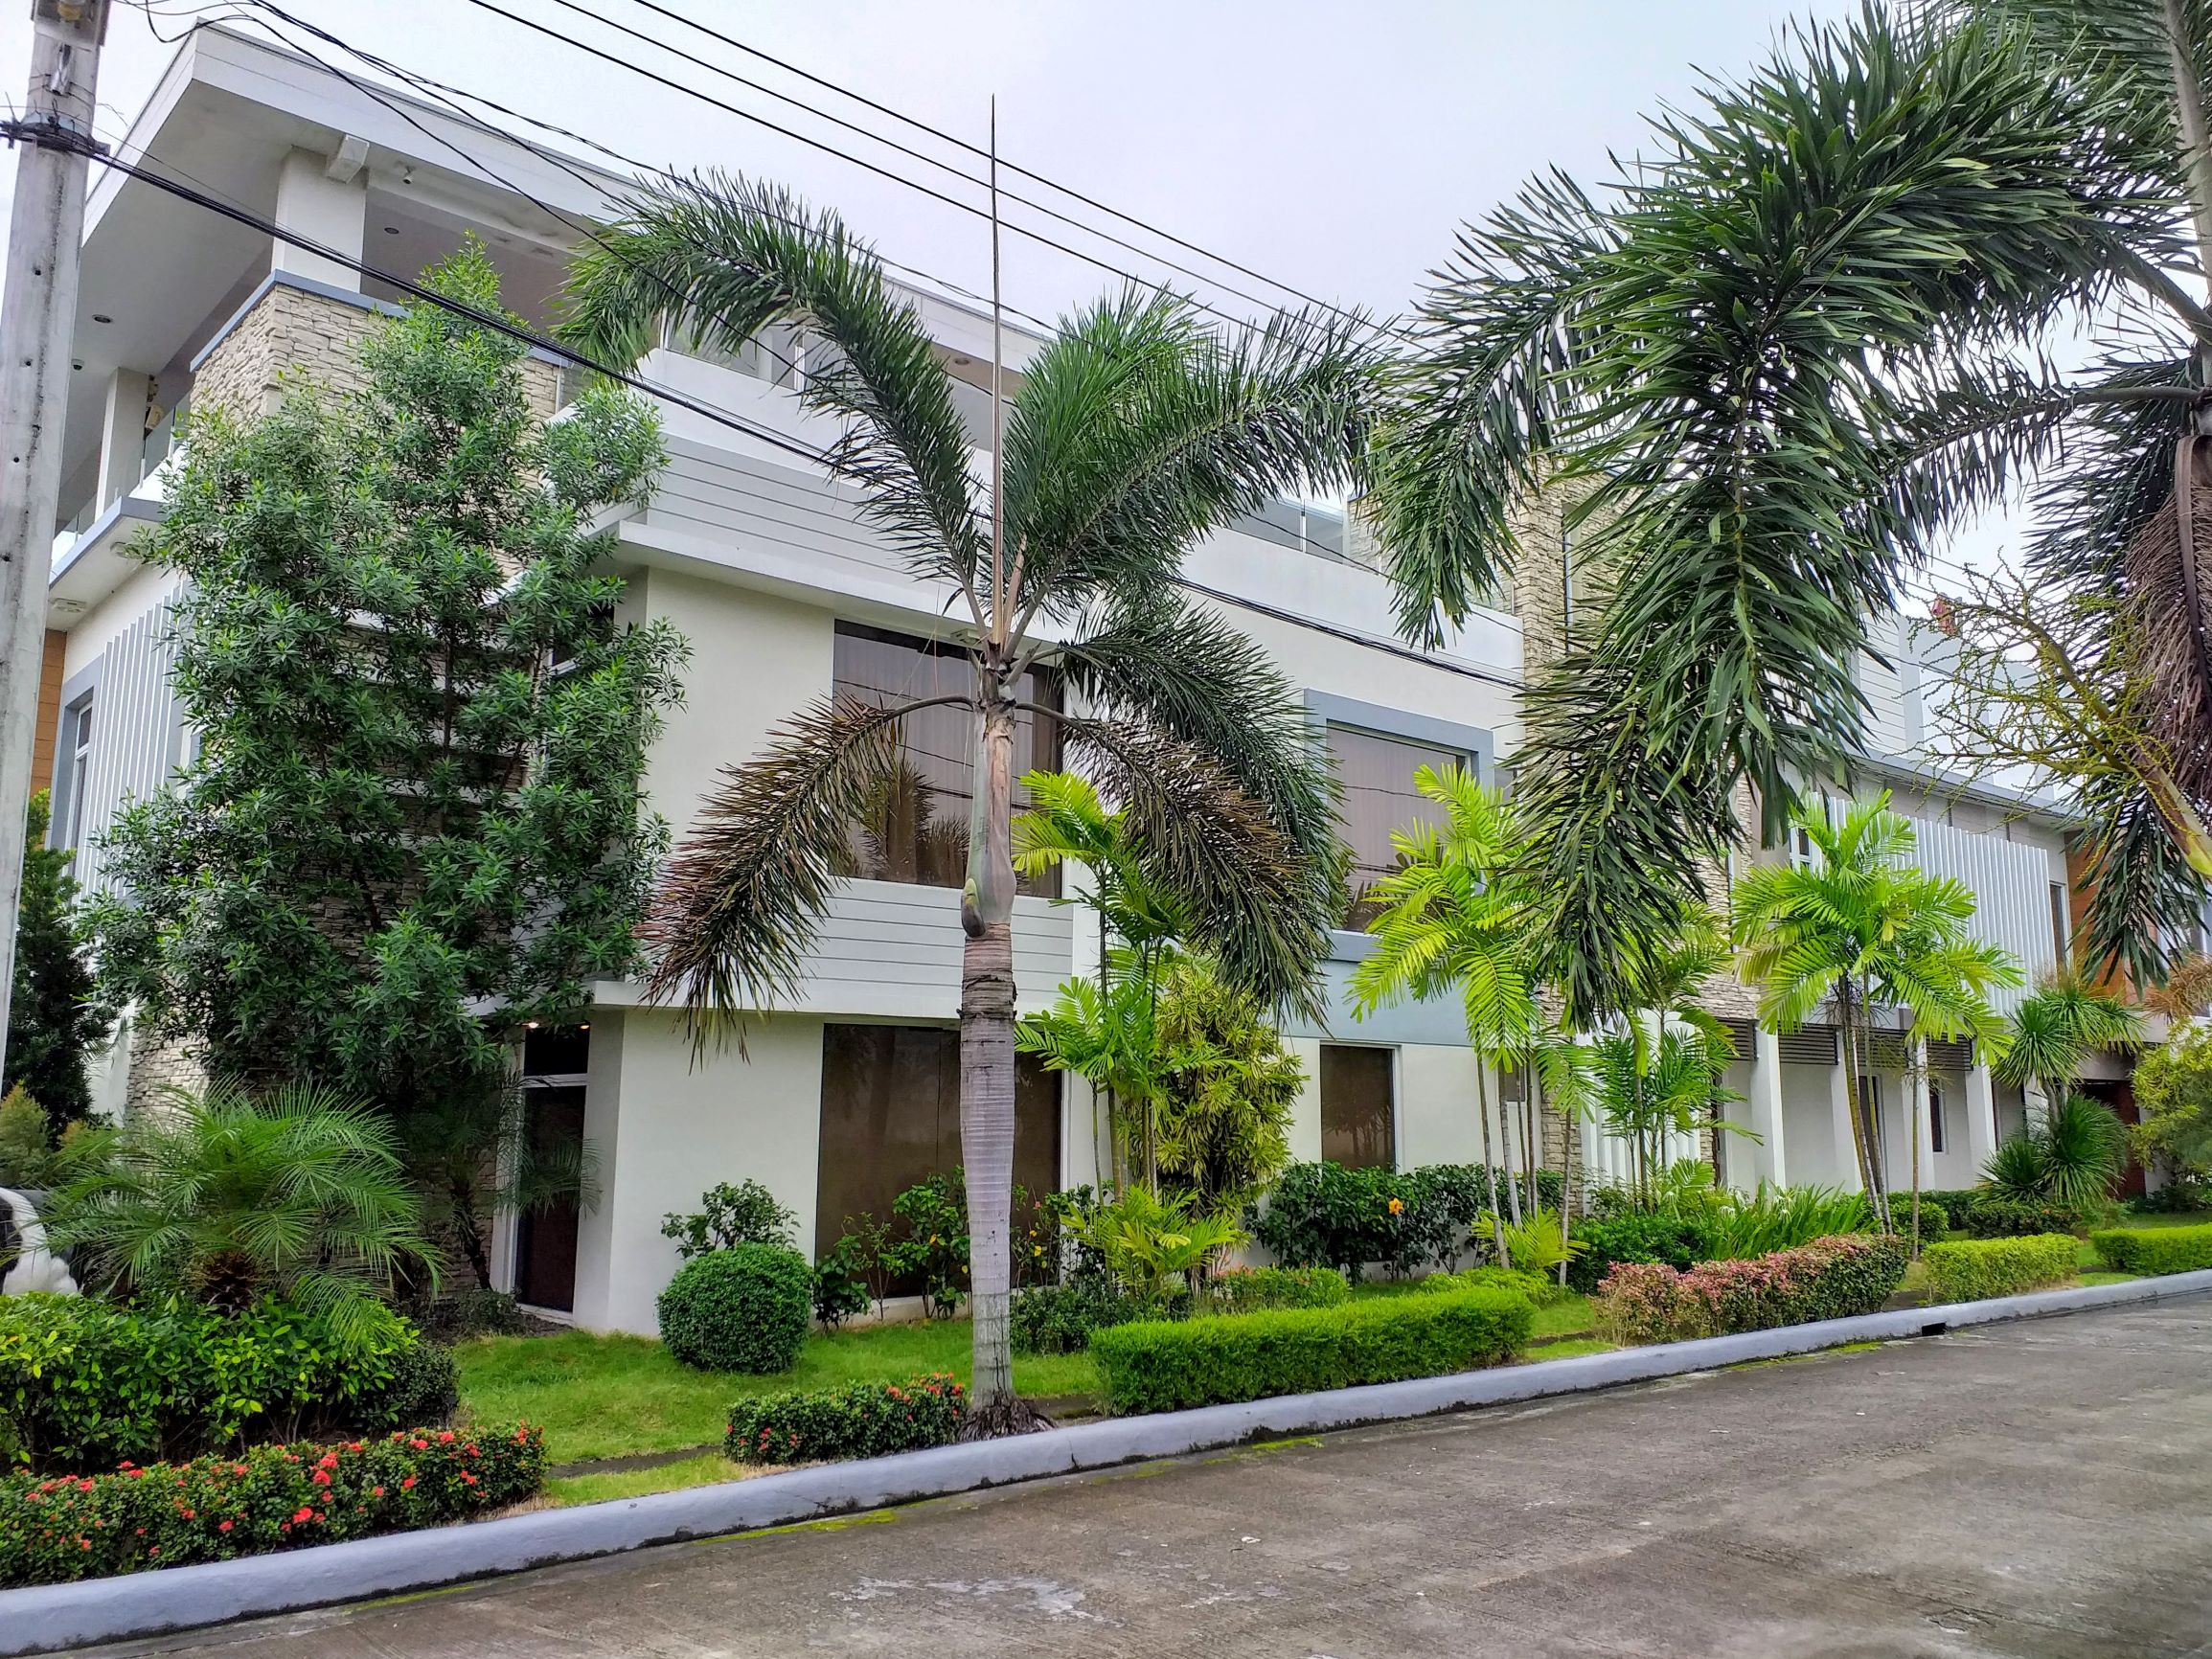 Pulu Amsic Homes For Sale, Angeles City Philippines, Real Estate and Property